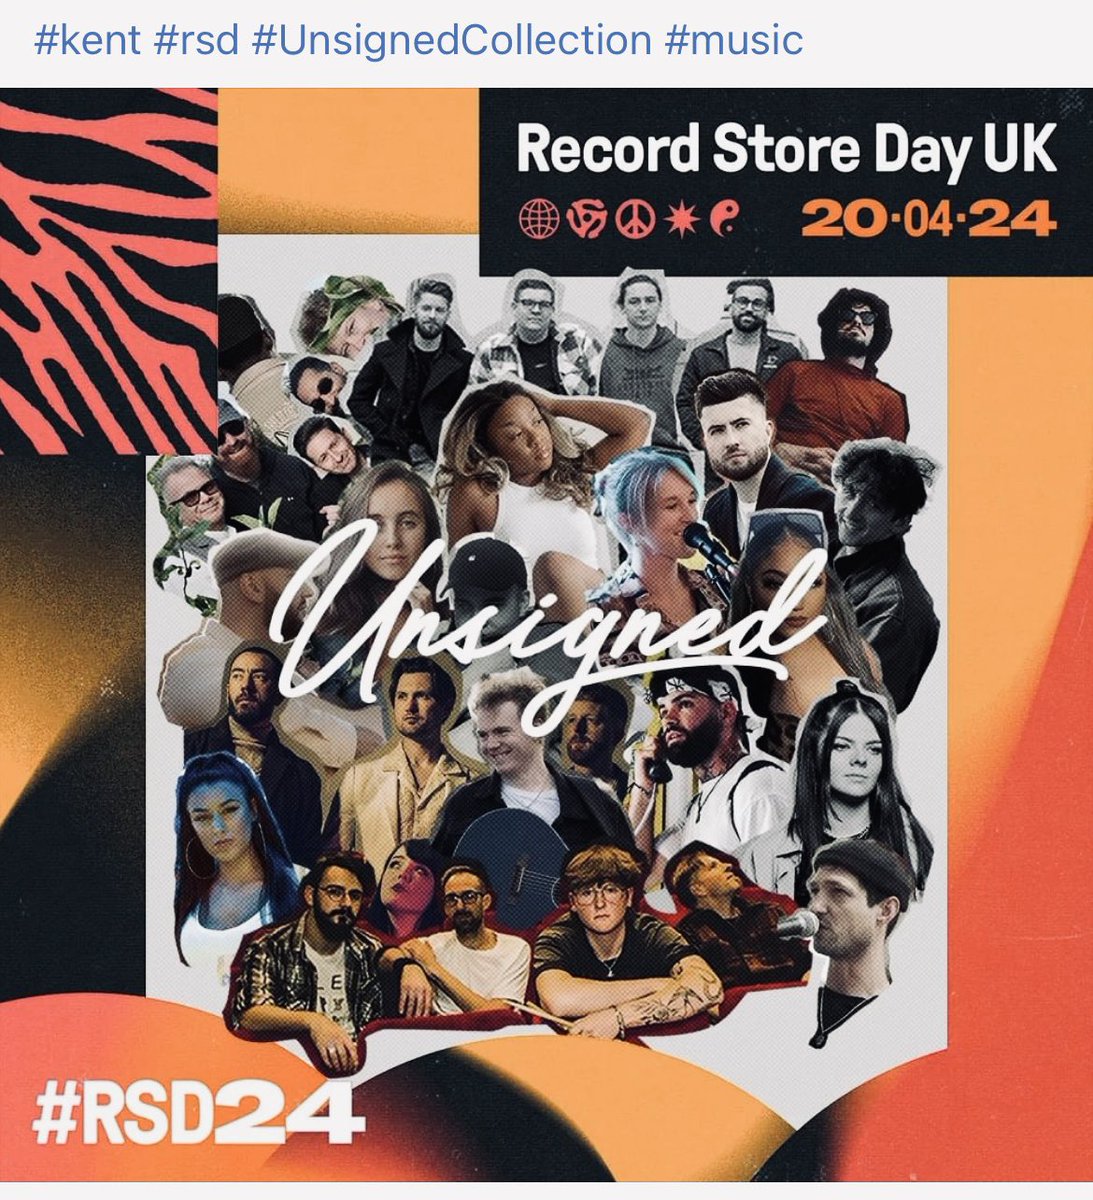 …..as record store day spins into action. You can pick up a free copy of this at shops in Kent UK….
Go on, you know you want to…..and play it loud ok!
.
.
#cdcollection #cds #newmusic #originalmusic #discovery #record #recordstoreday #recordcollection #recordcollector